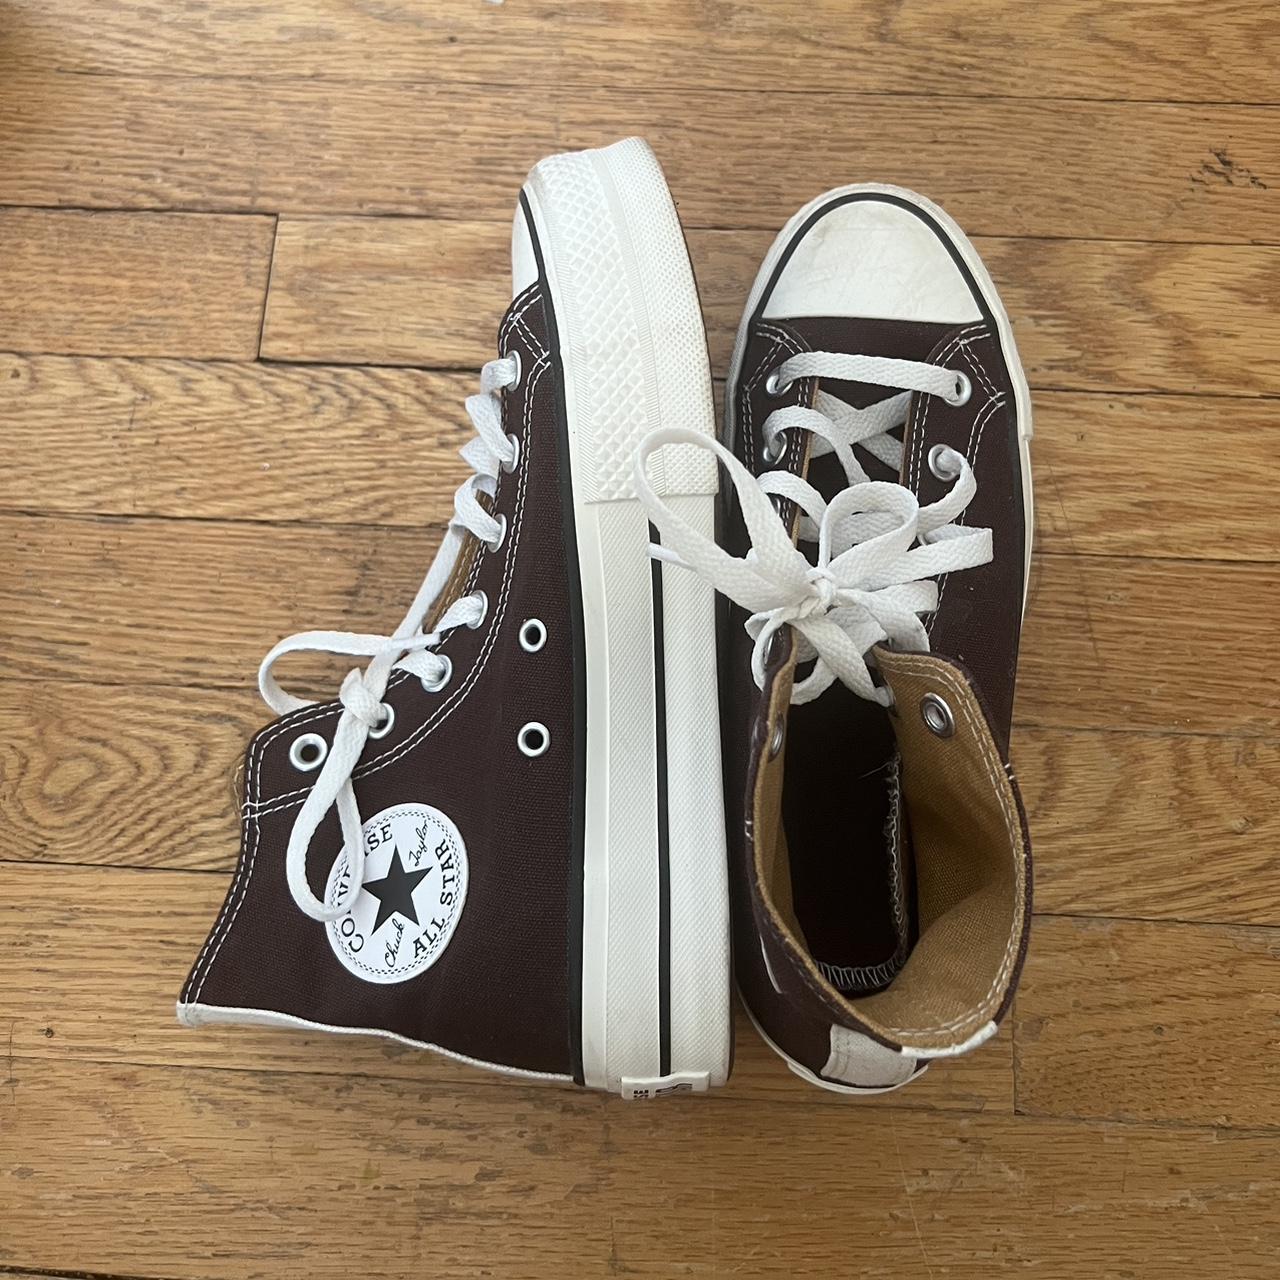 Converse Women's Brown and White Trainers | Depop